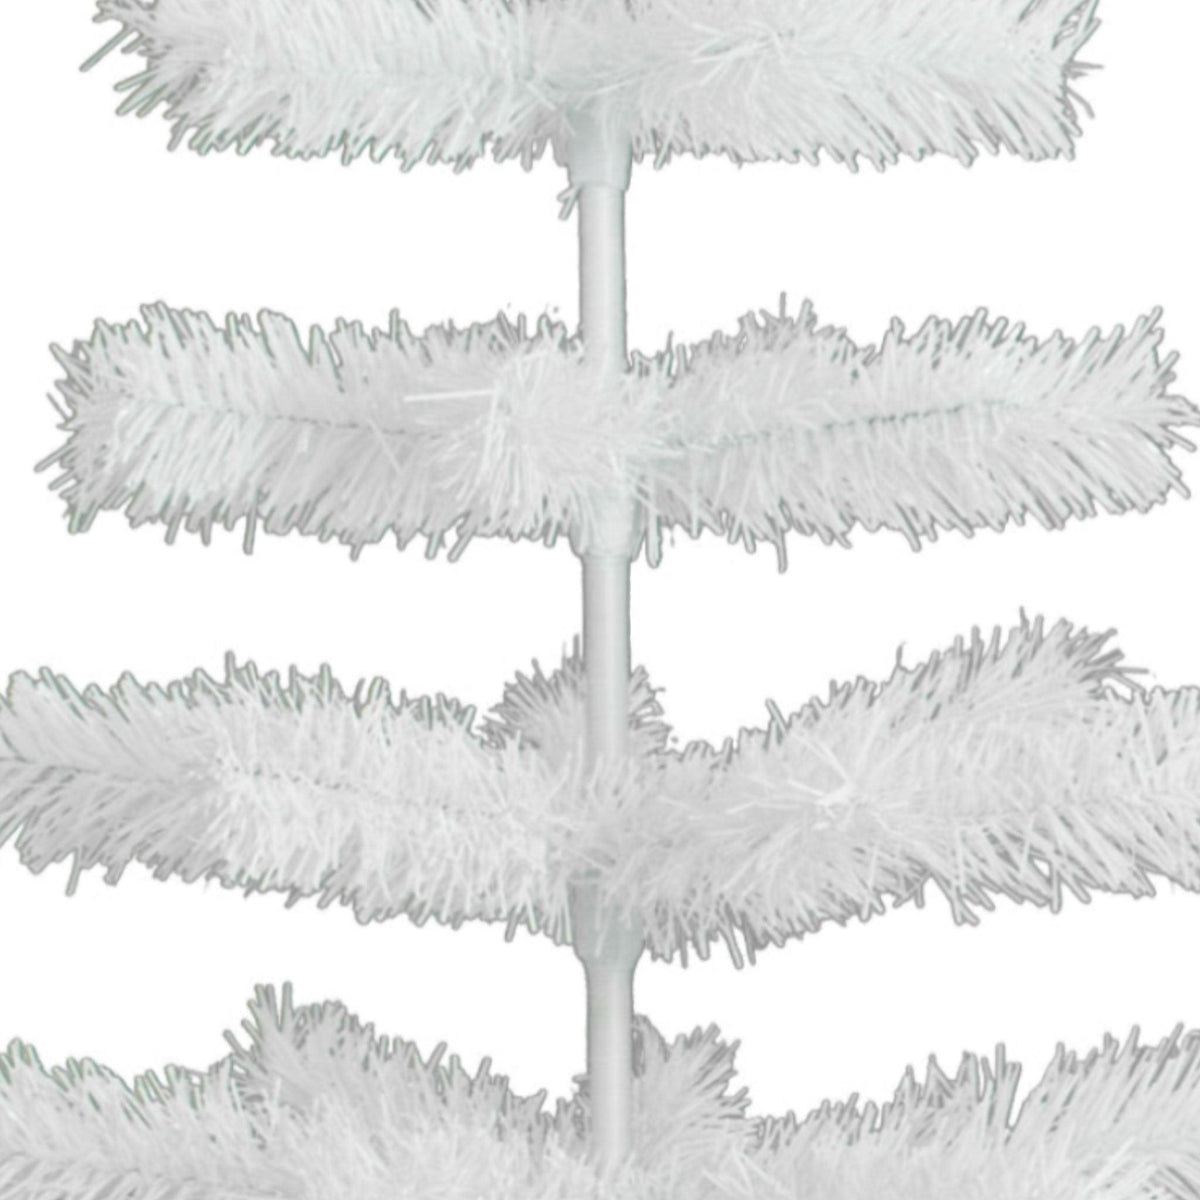 Shop for 36in Tall White Tinsel Christmas Trees at leedisplay.com